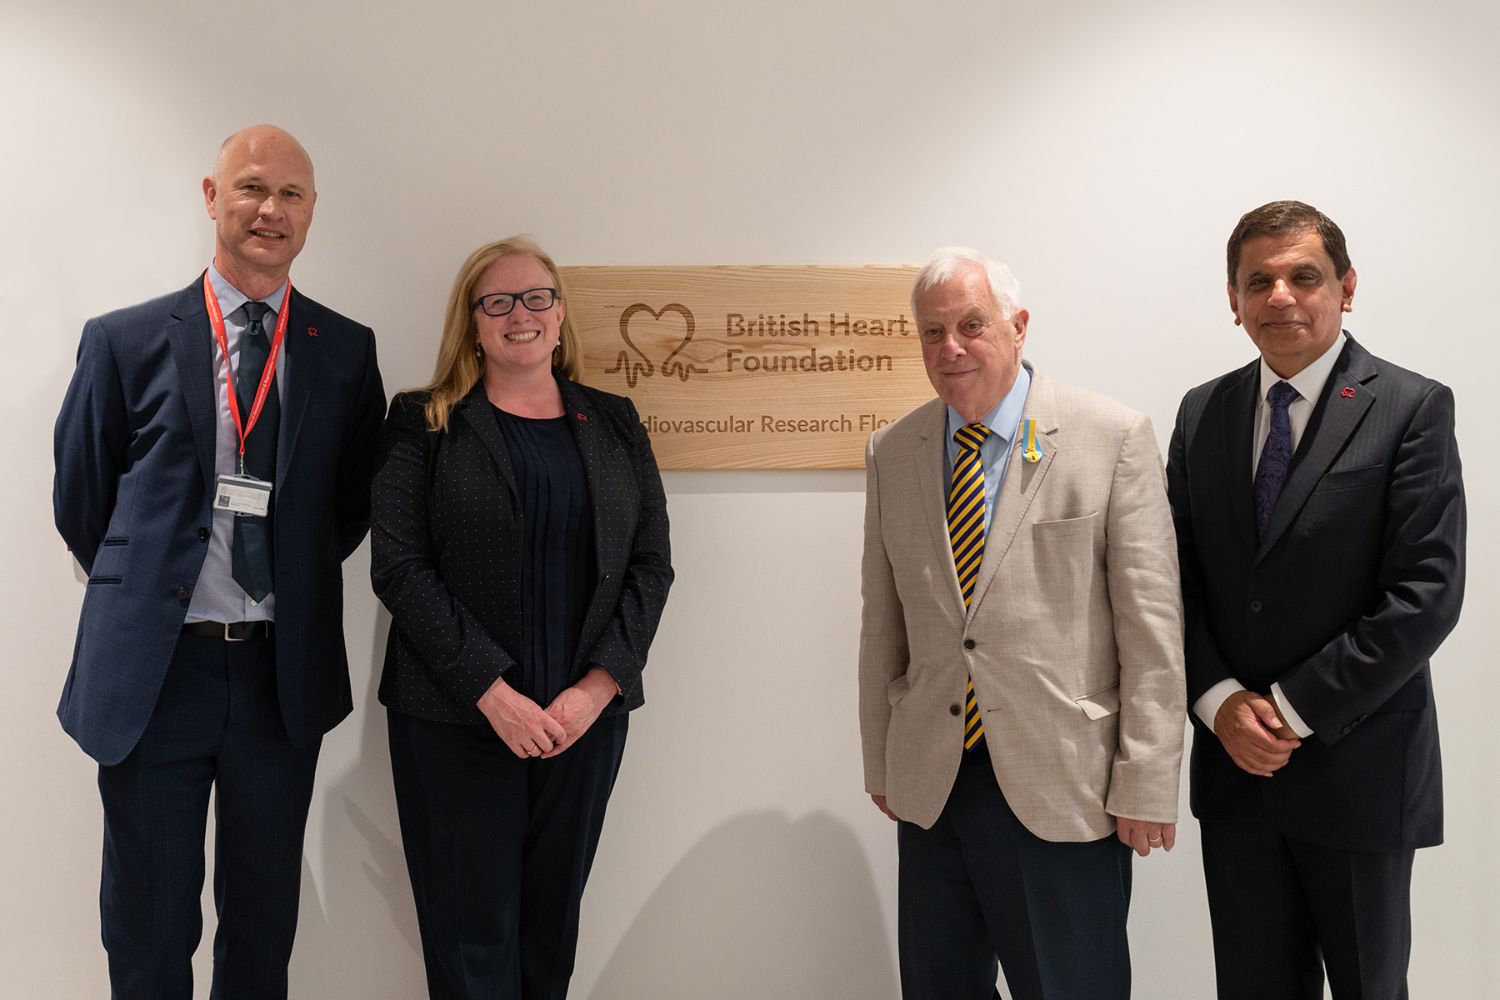 <p>Professor Paul Riley, Dr Charmaine Griffiths (BHF Chief Executive), Chancellor Lord Patten of Barnes, and Professor Nilesh Samani (BHF Medical Director)</p>

<p><span class="reduce_font_size"><em>Image credit: Julie Stevens</em></span></p>
